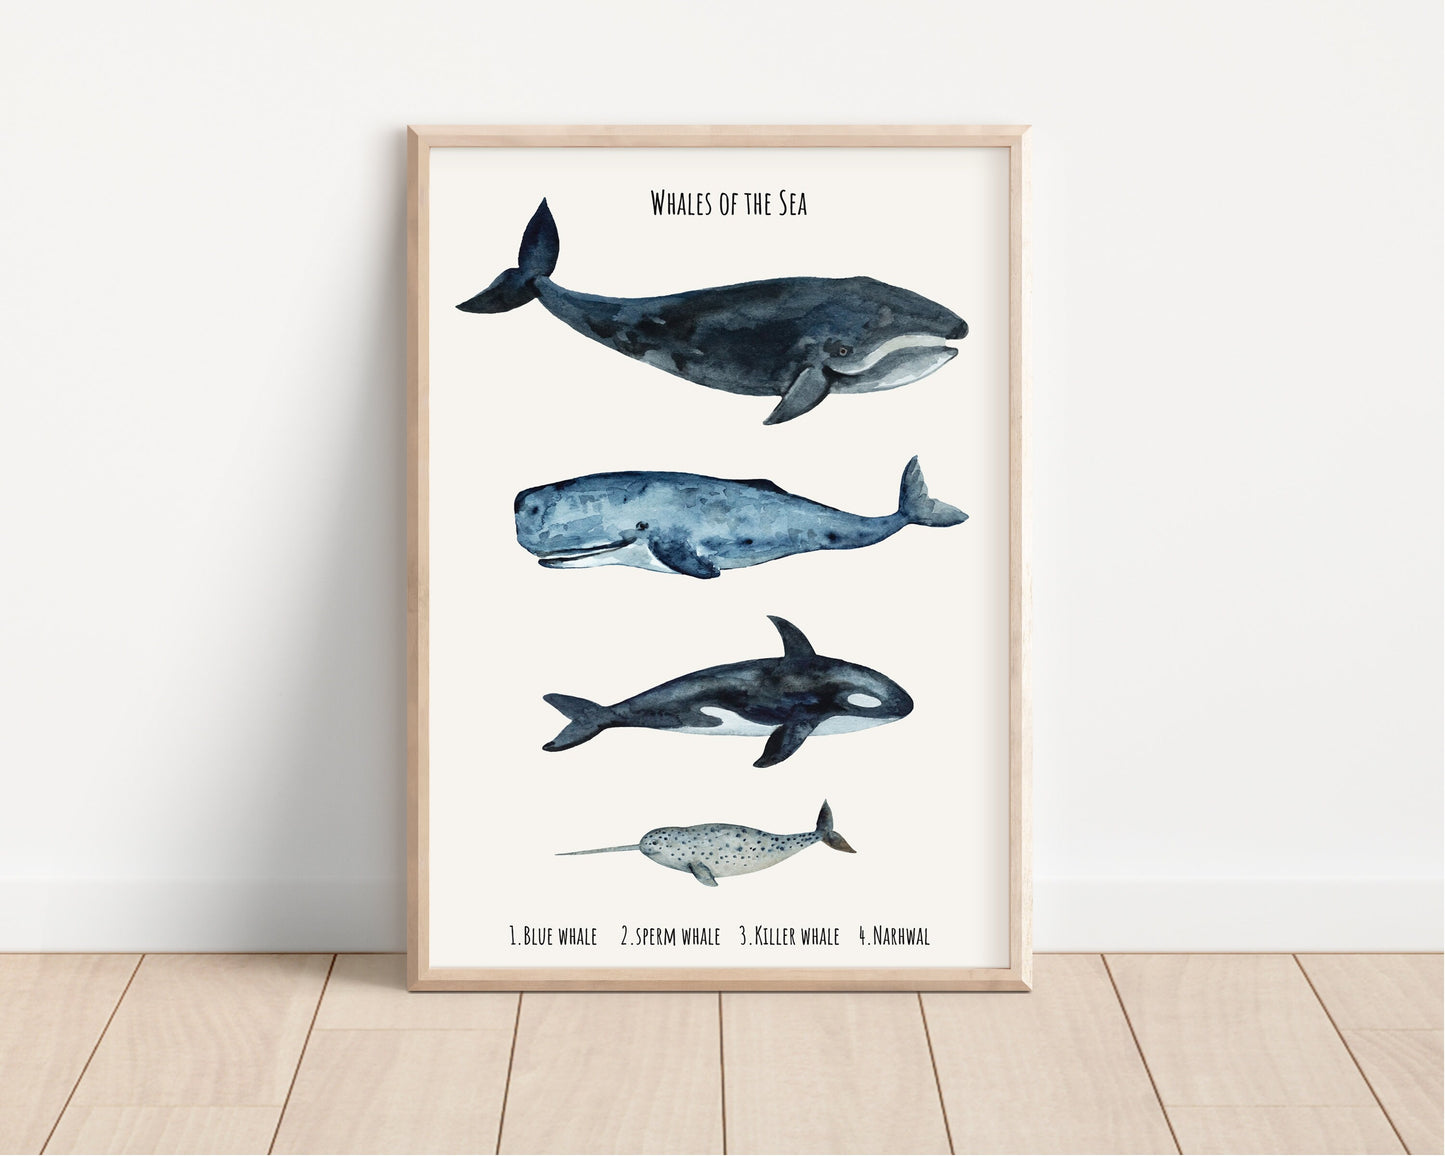 Whale sizes art print, Kids Bedroom Print, Education print, Classroom décor, Whale watercolour gift art, Learning resources, Childrens Room,